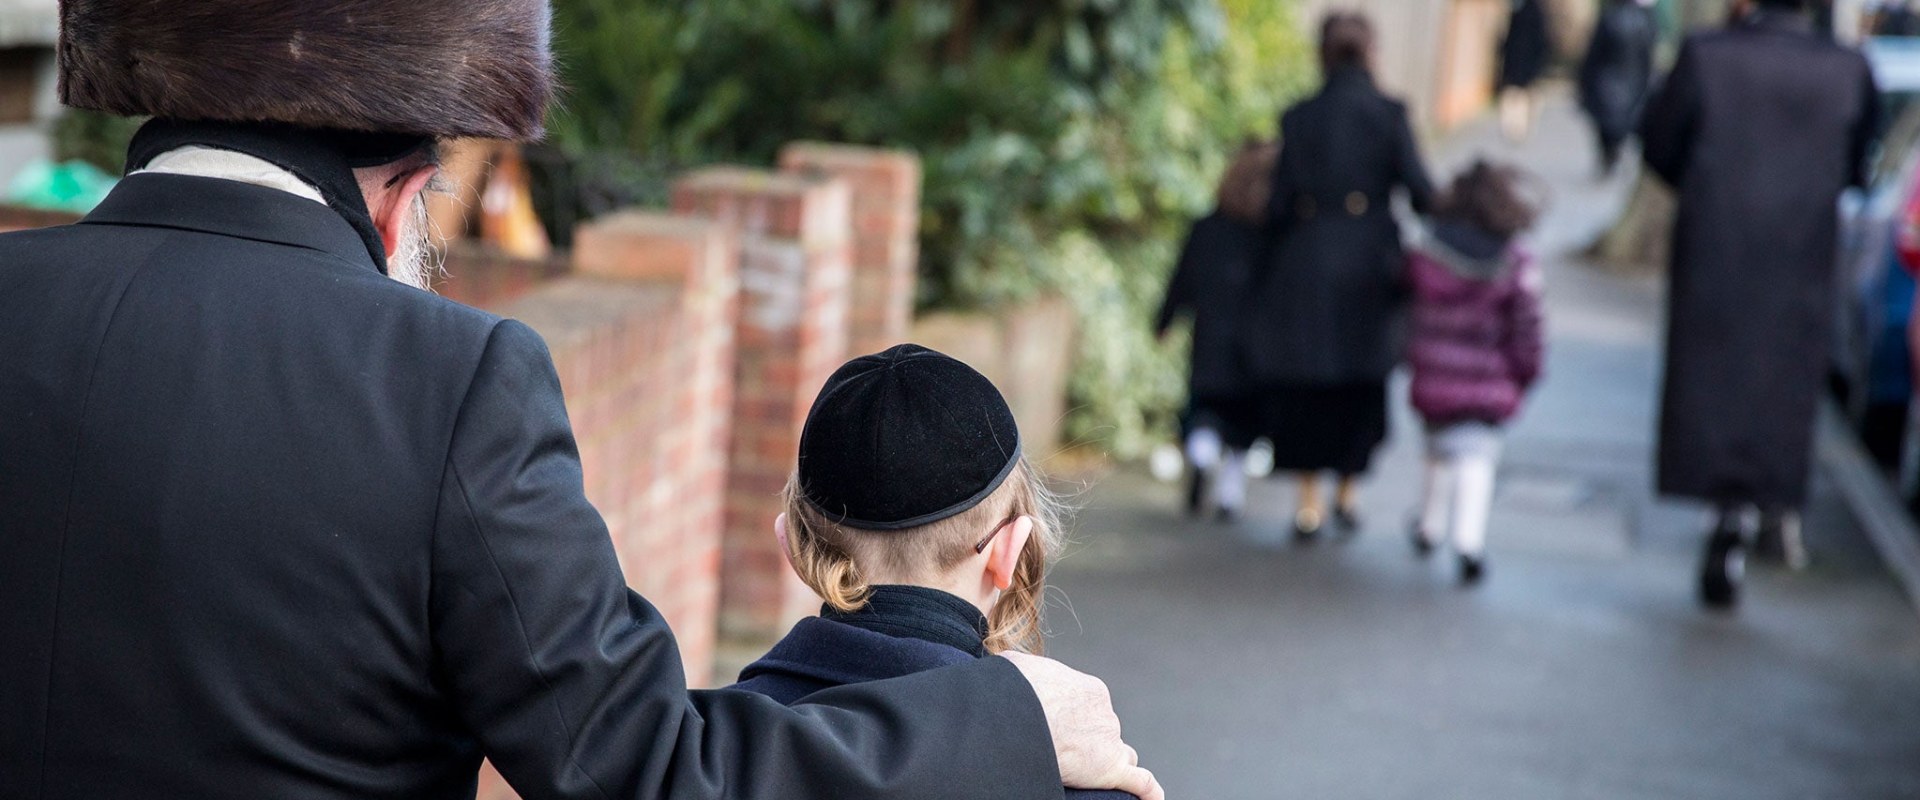 Supporting and Engaging with the Jewish Community in London